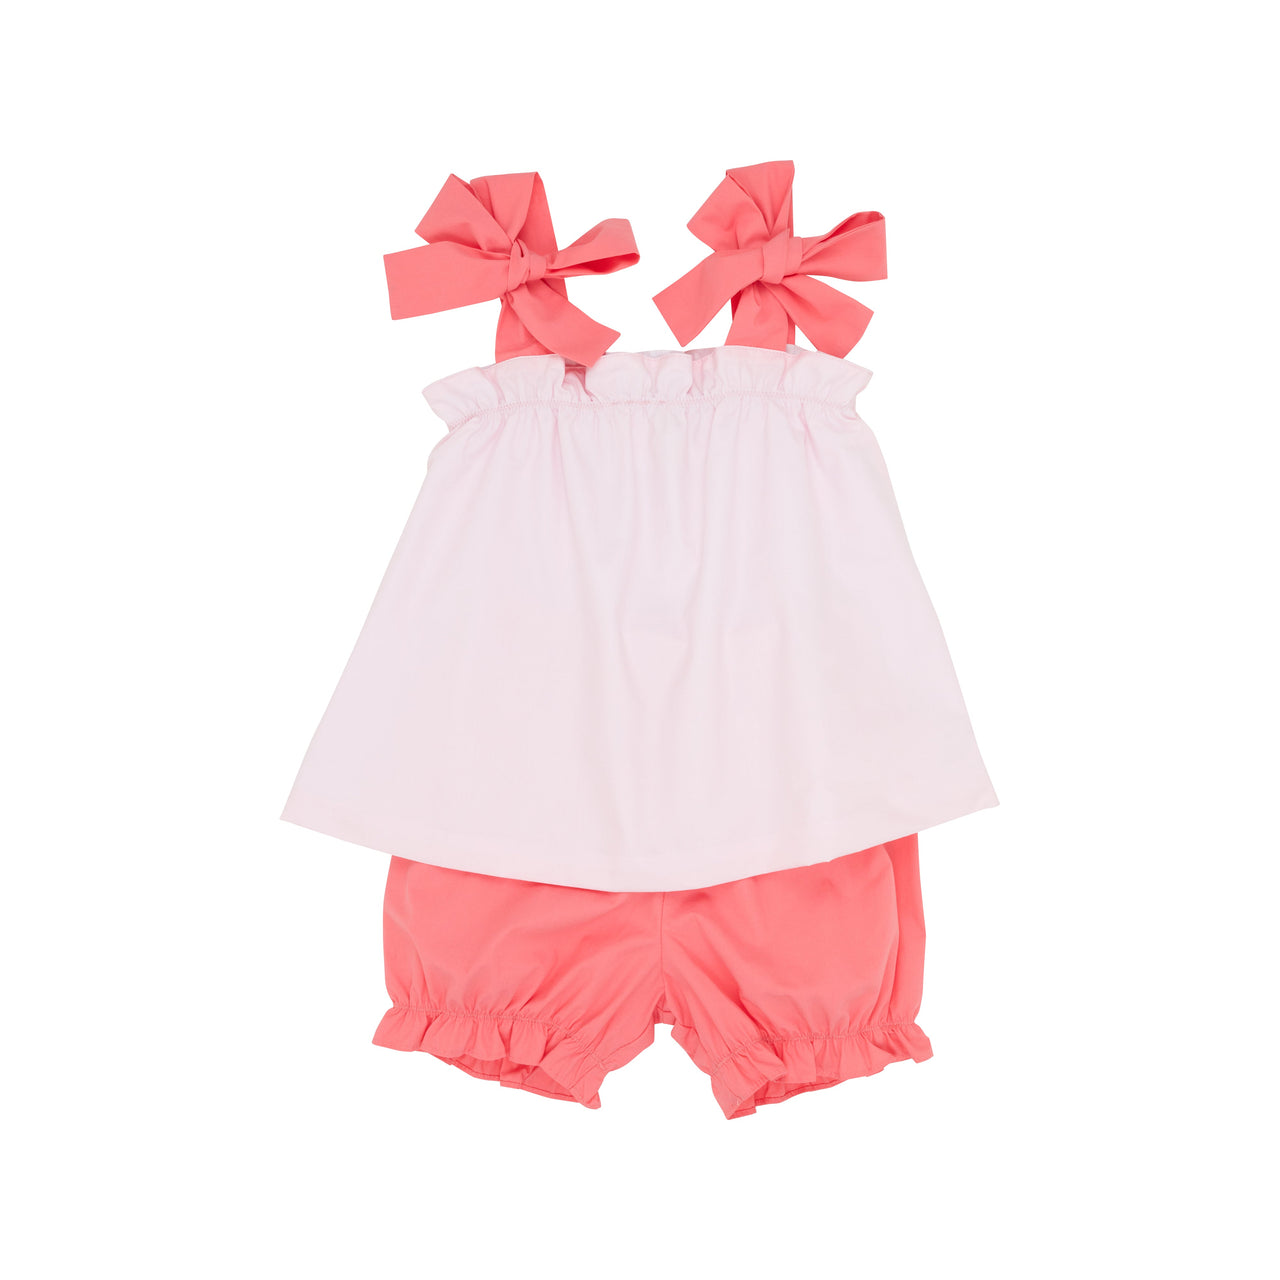 Lainey's Little Set | Palm Beach Pink with Parrot Cay Coral